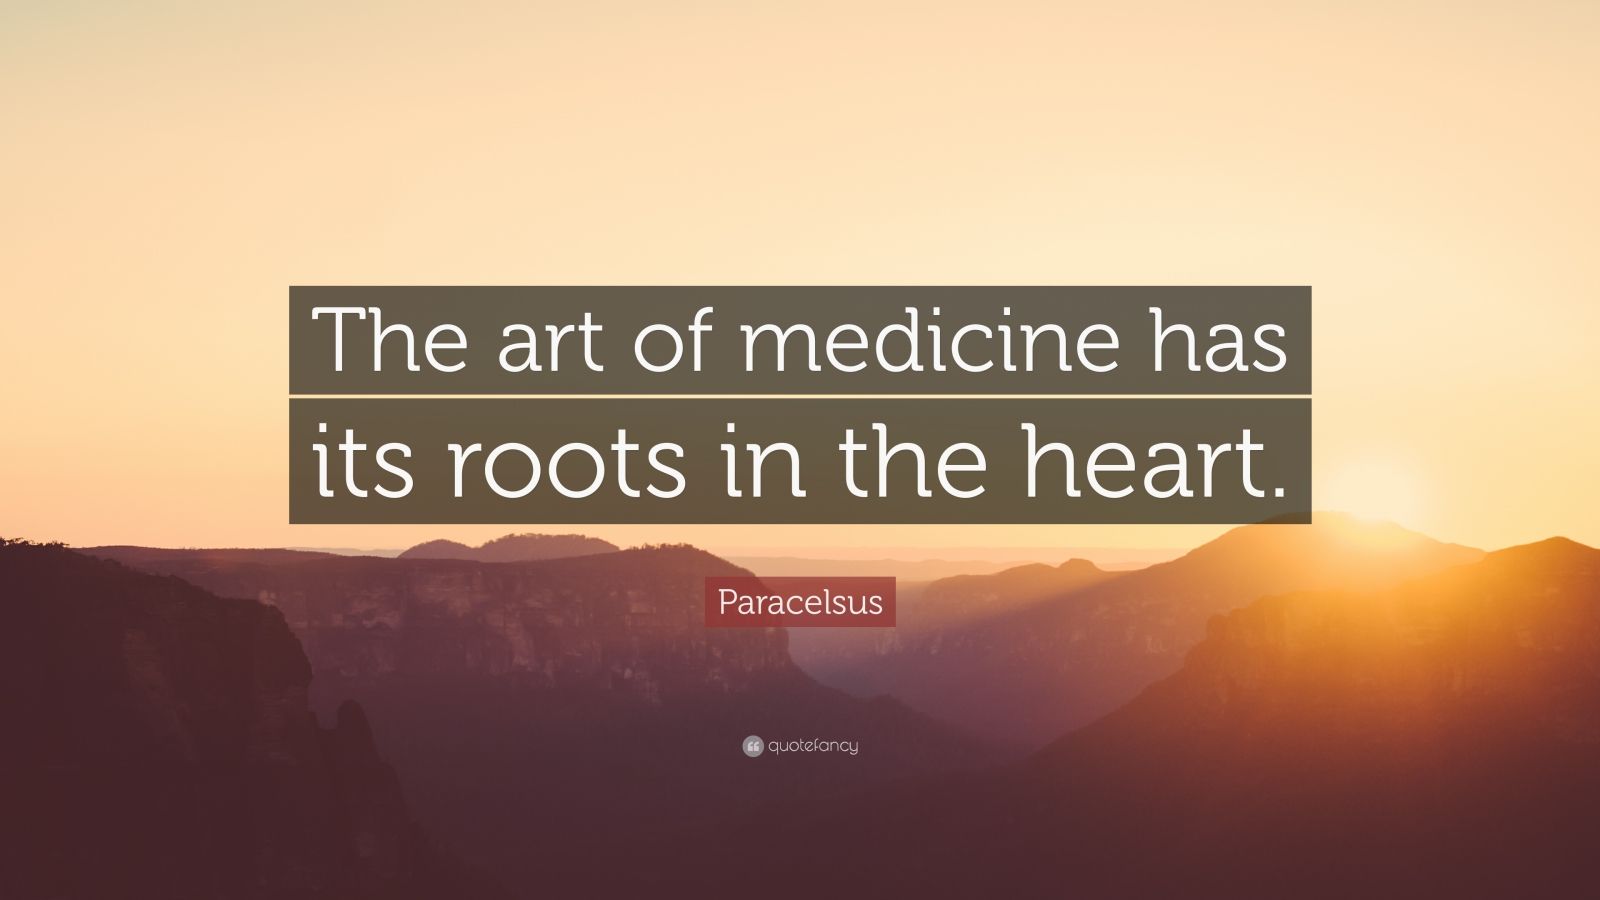 Paracelsus Quote “The art of medicine has its roots in